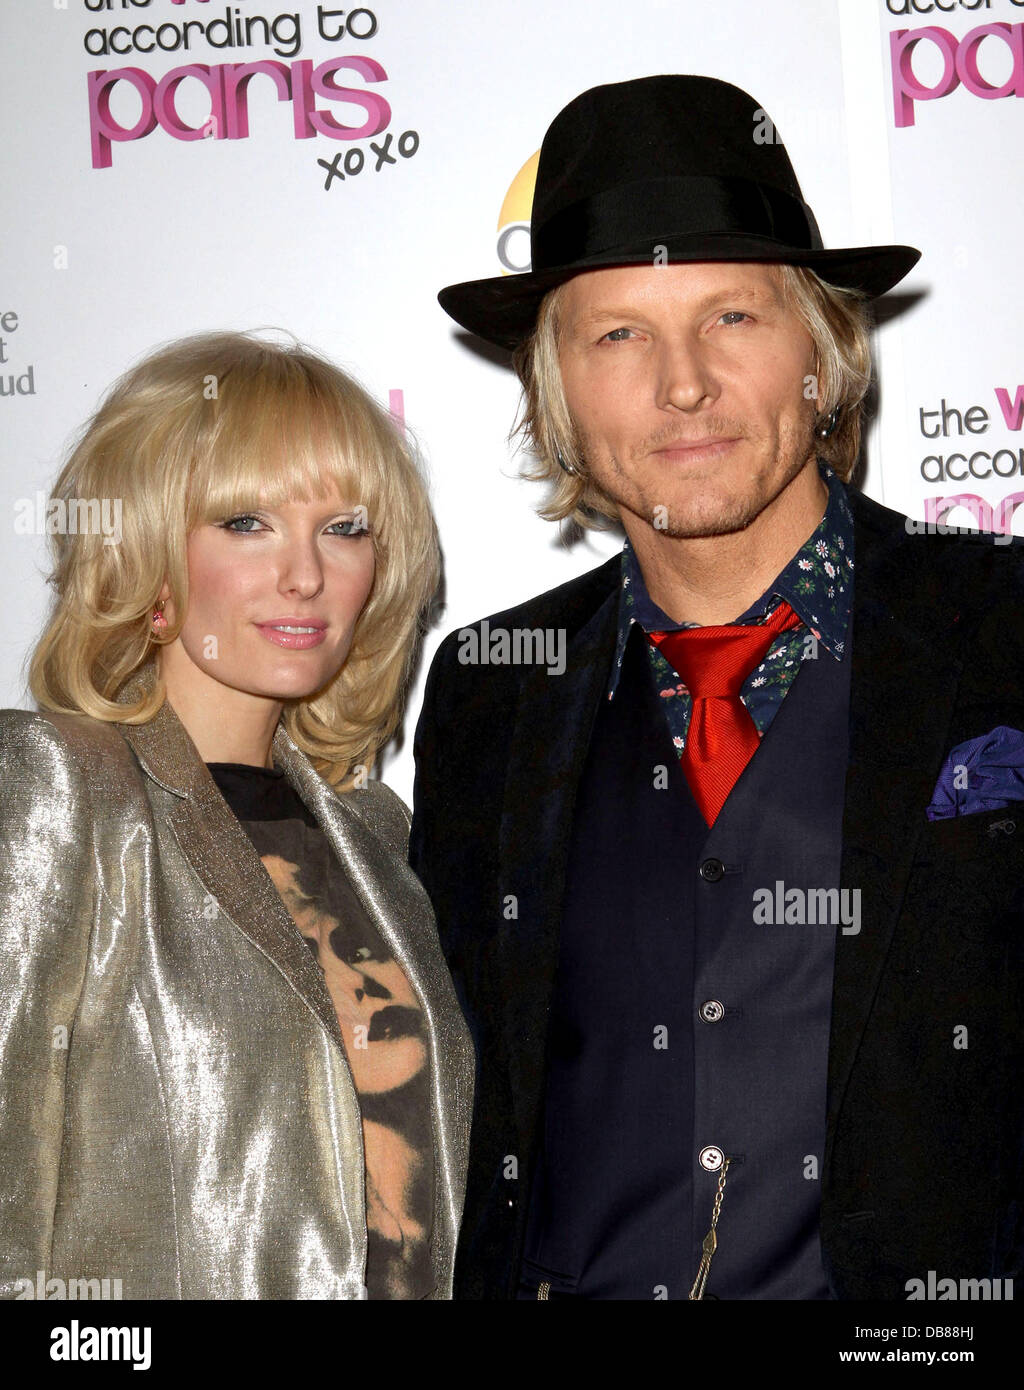 Ace Harper; Matt Sorum 'The World According To Paris' Series Premiere Party  held at the Tropicana Bar at The Rooselvelt Hotel - Arrivals Hollywood,  California - 17.05.11 Stock Photo - Alamy